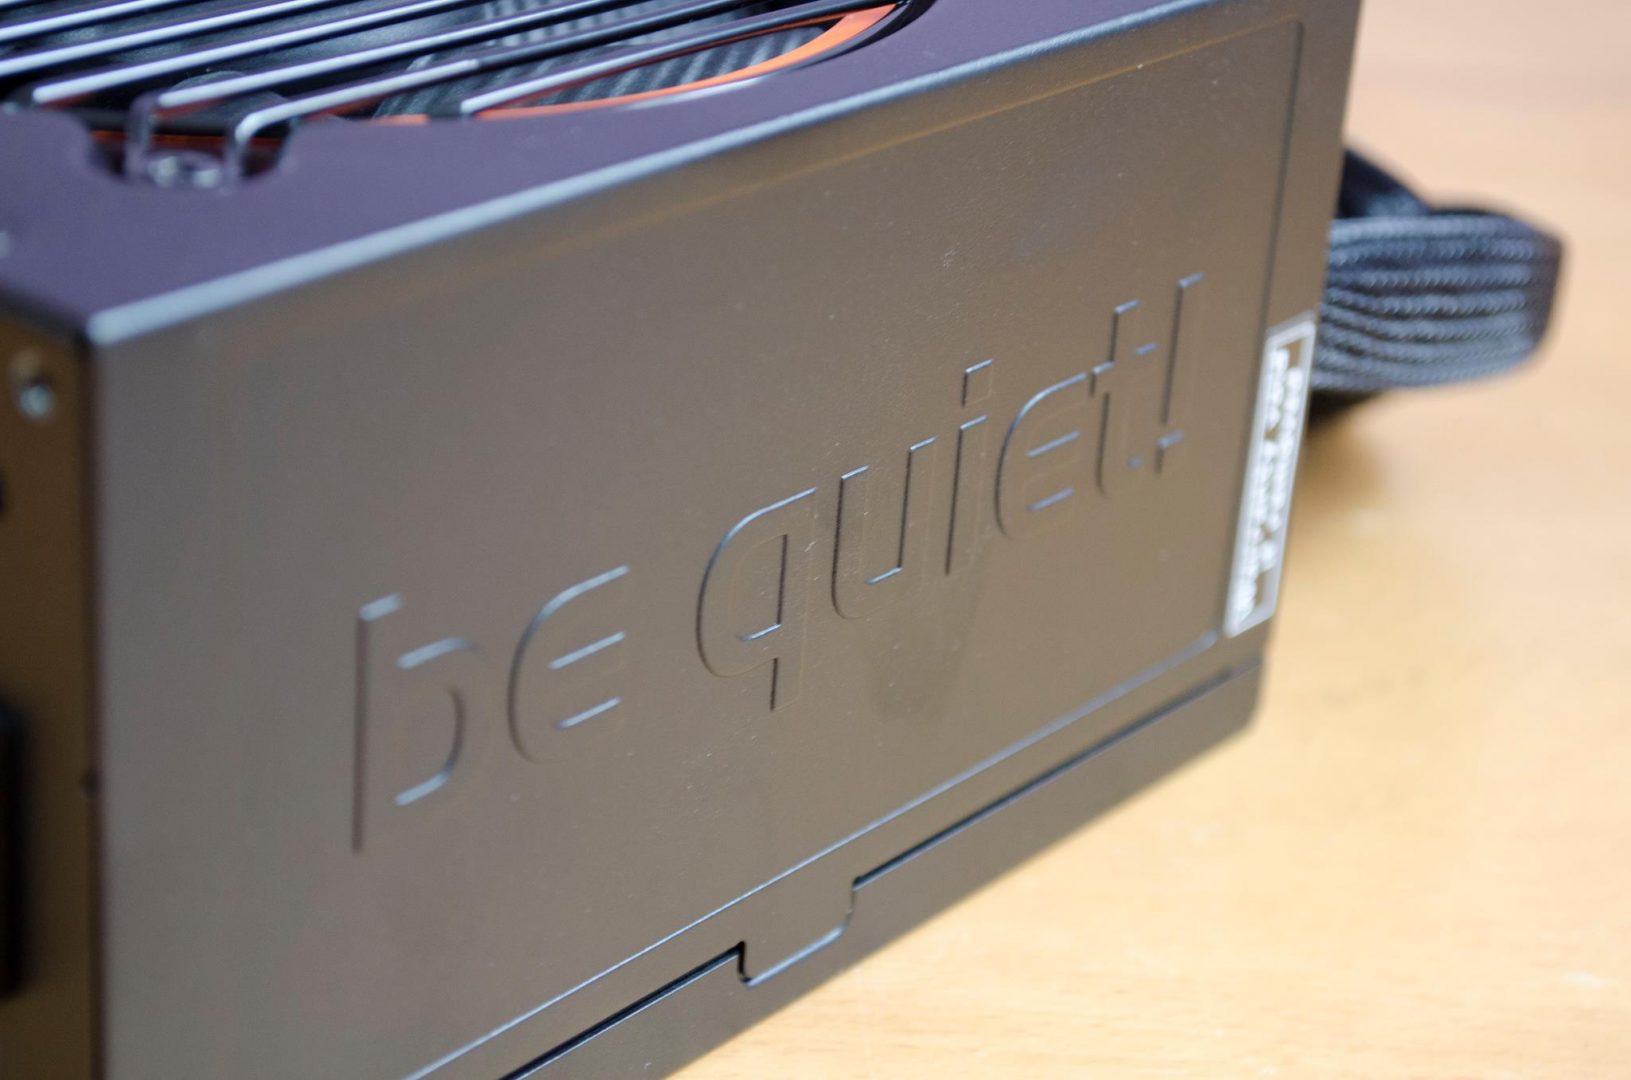 be quiet! Pure Power 10 600W PSU Overview